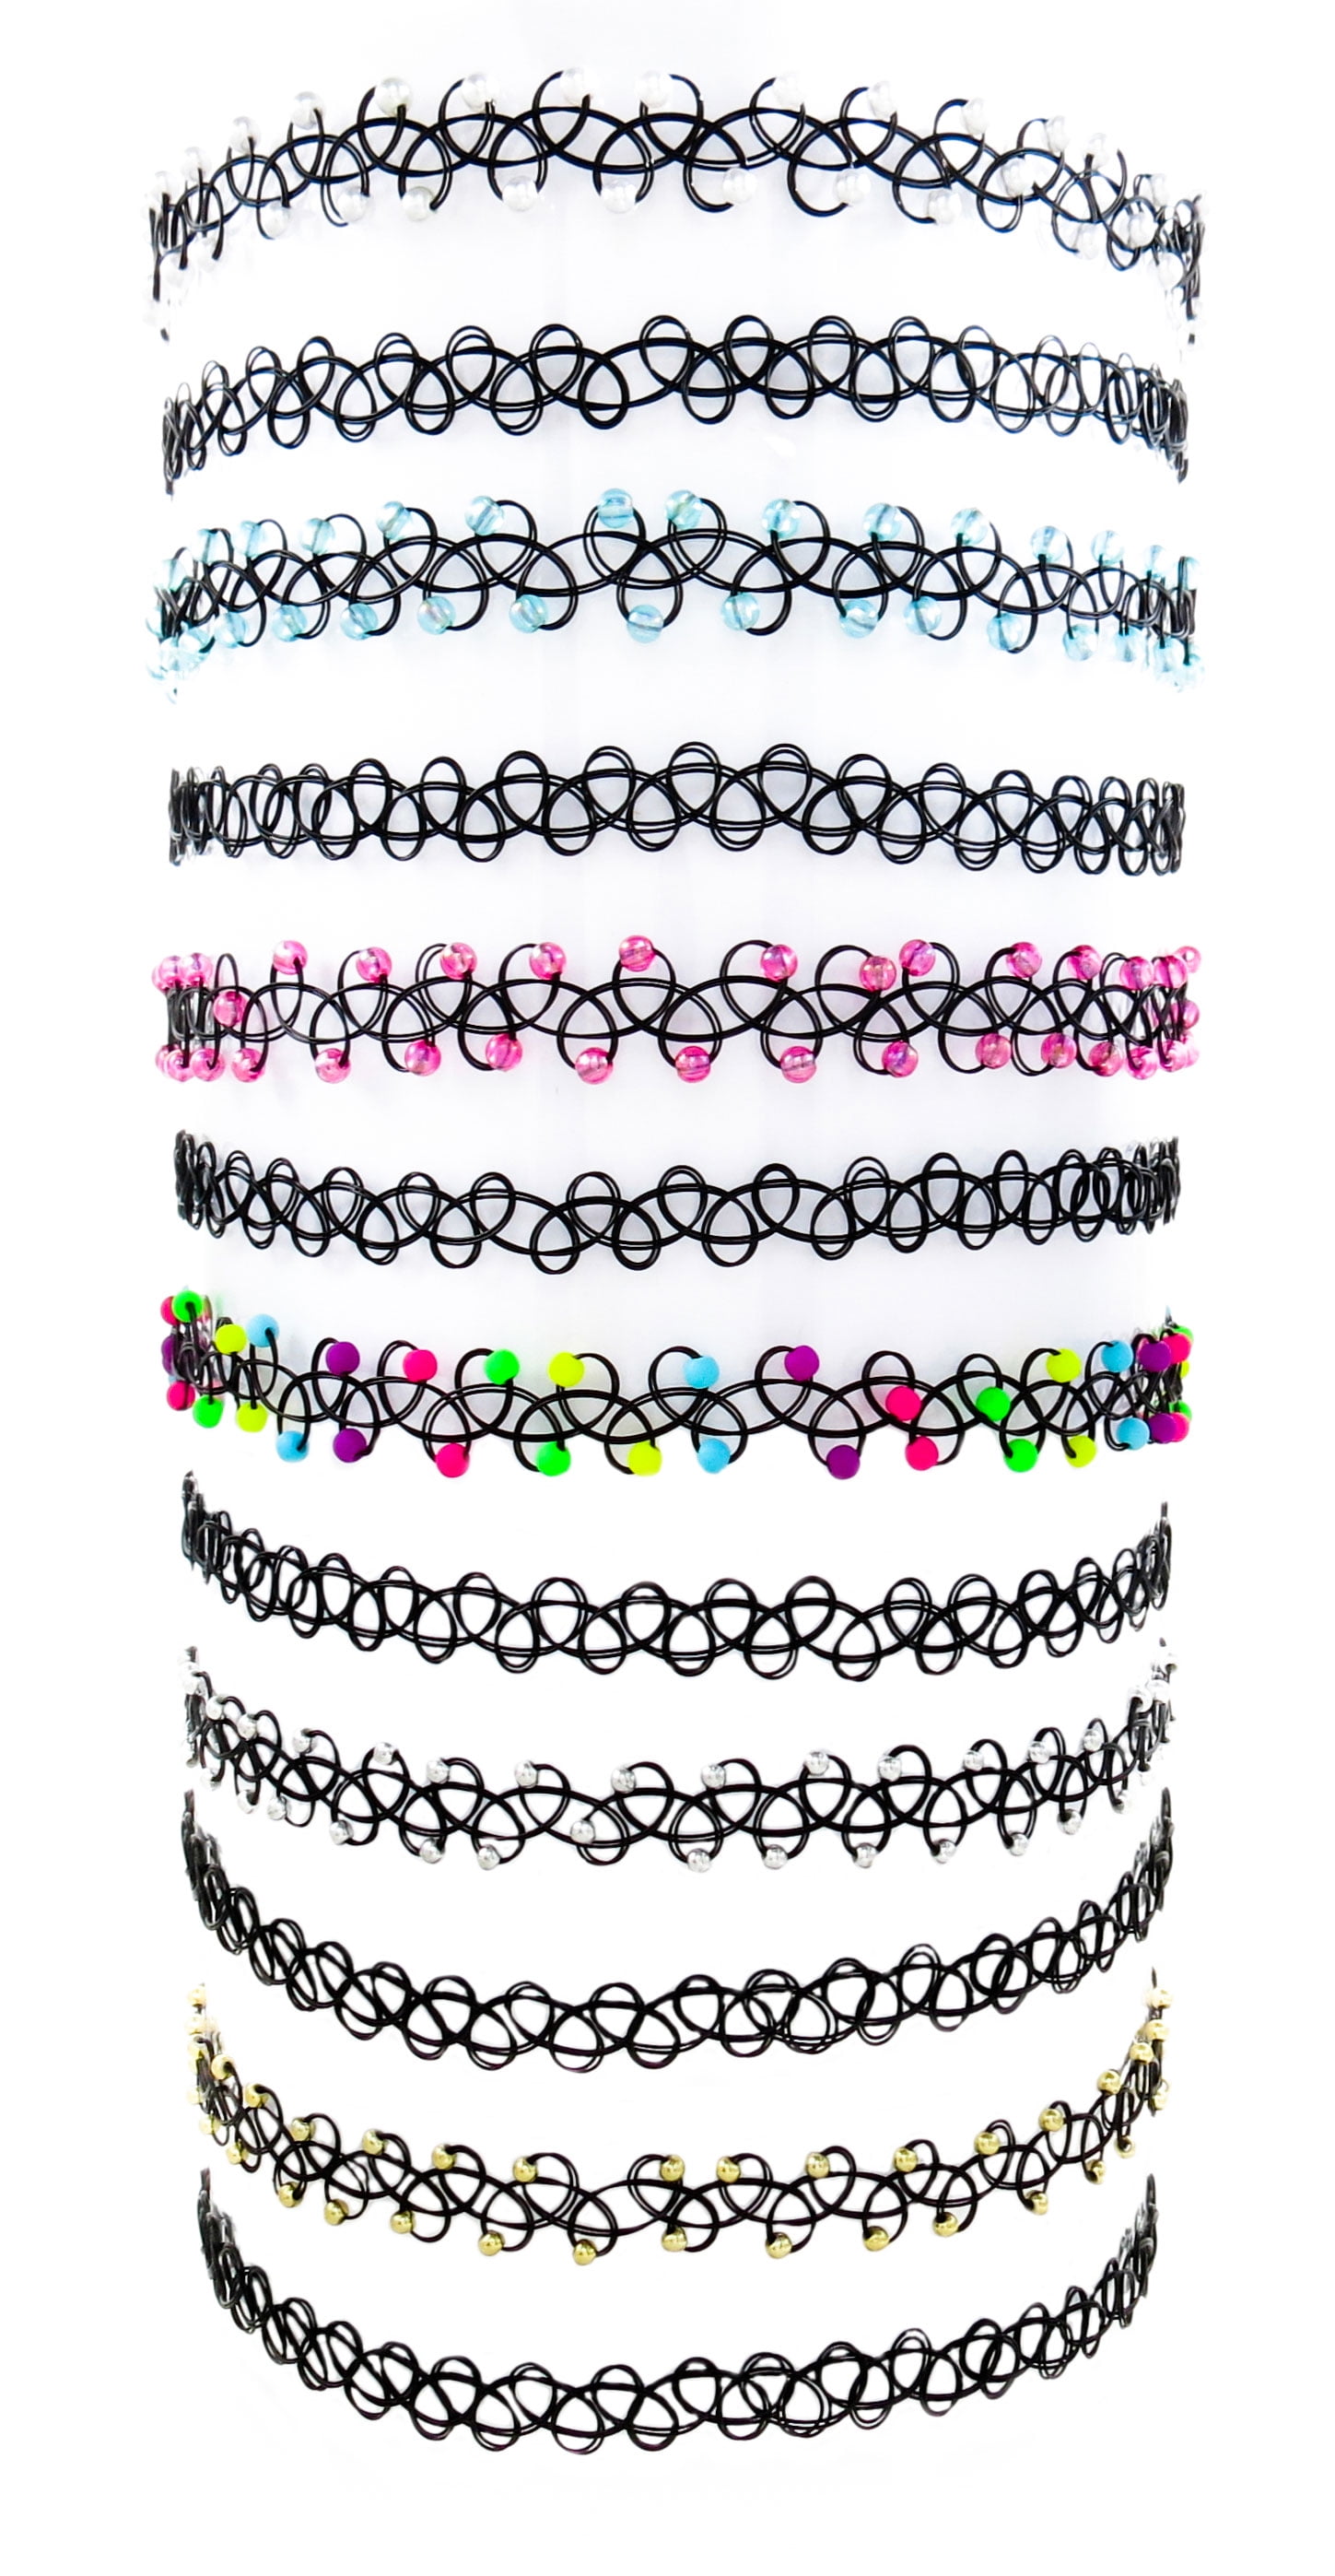 Fablinks 12 Choker Necklaces, Stretch Elastic Wire Tattoo Chokers for Teens